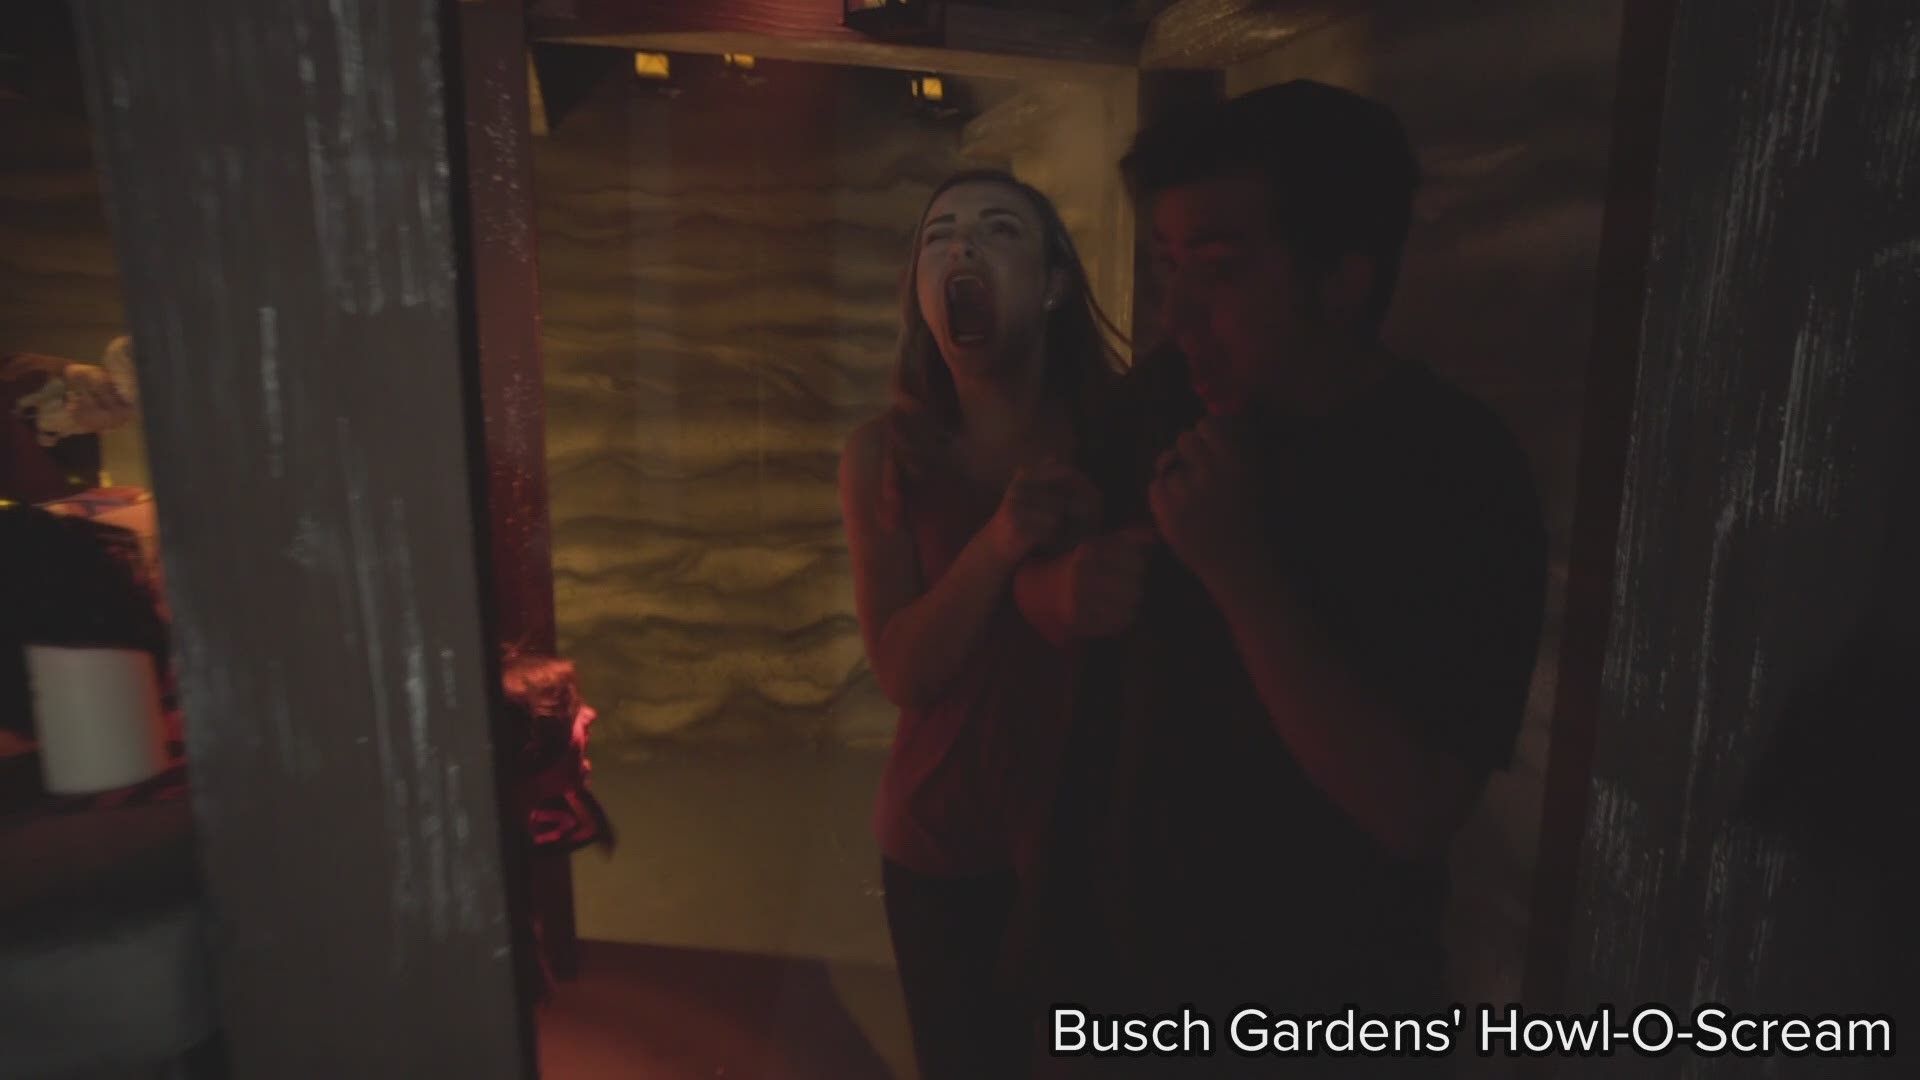 Busch Gardens Tampa celebrates "20 Years of Fear" with the return of Howl-O-Scream. This year's fright fest includes six haunted houses and nine scare zones.